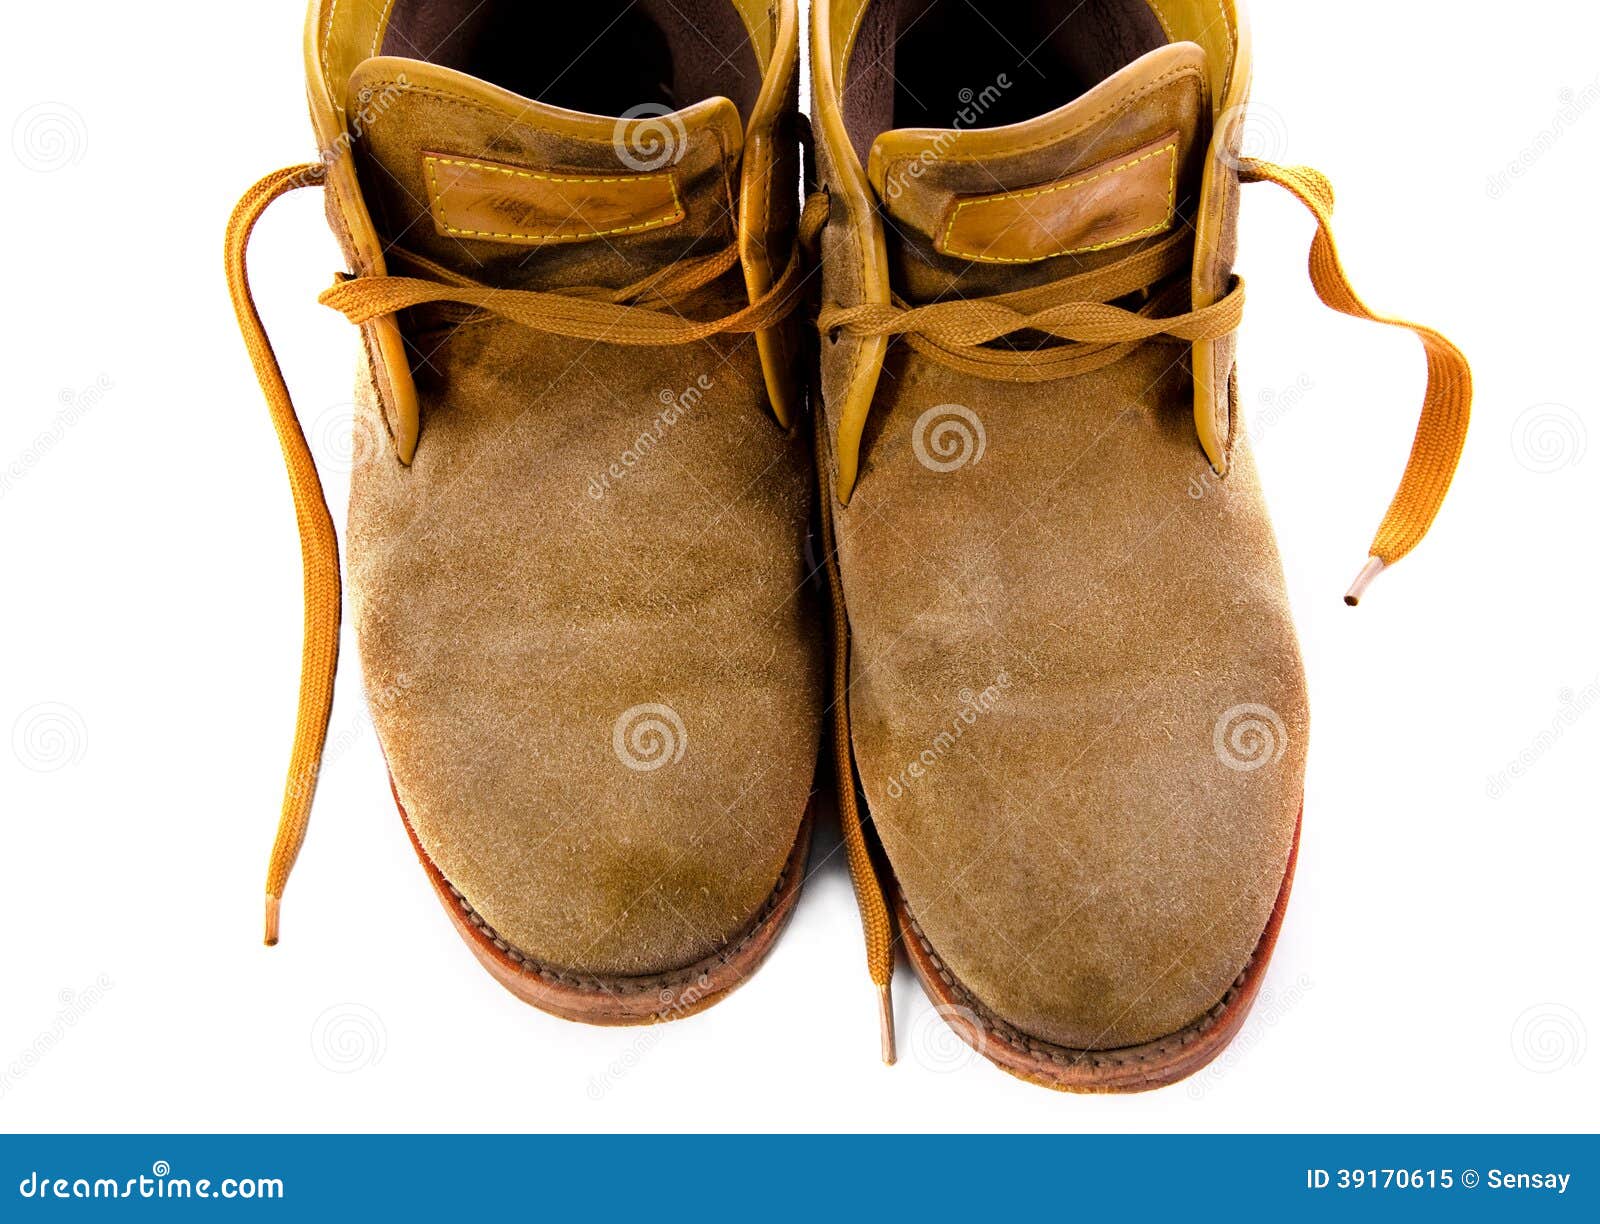 Old fashioned brown boots stock image. Image of hiking - 39170615